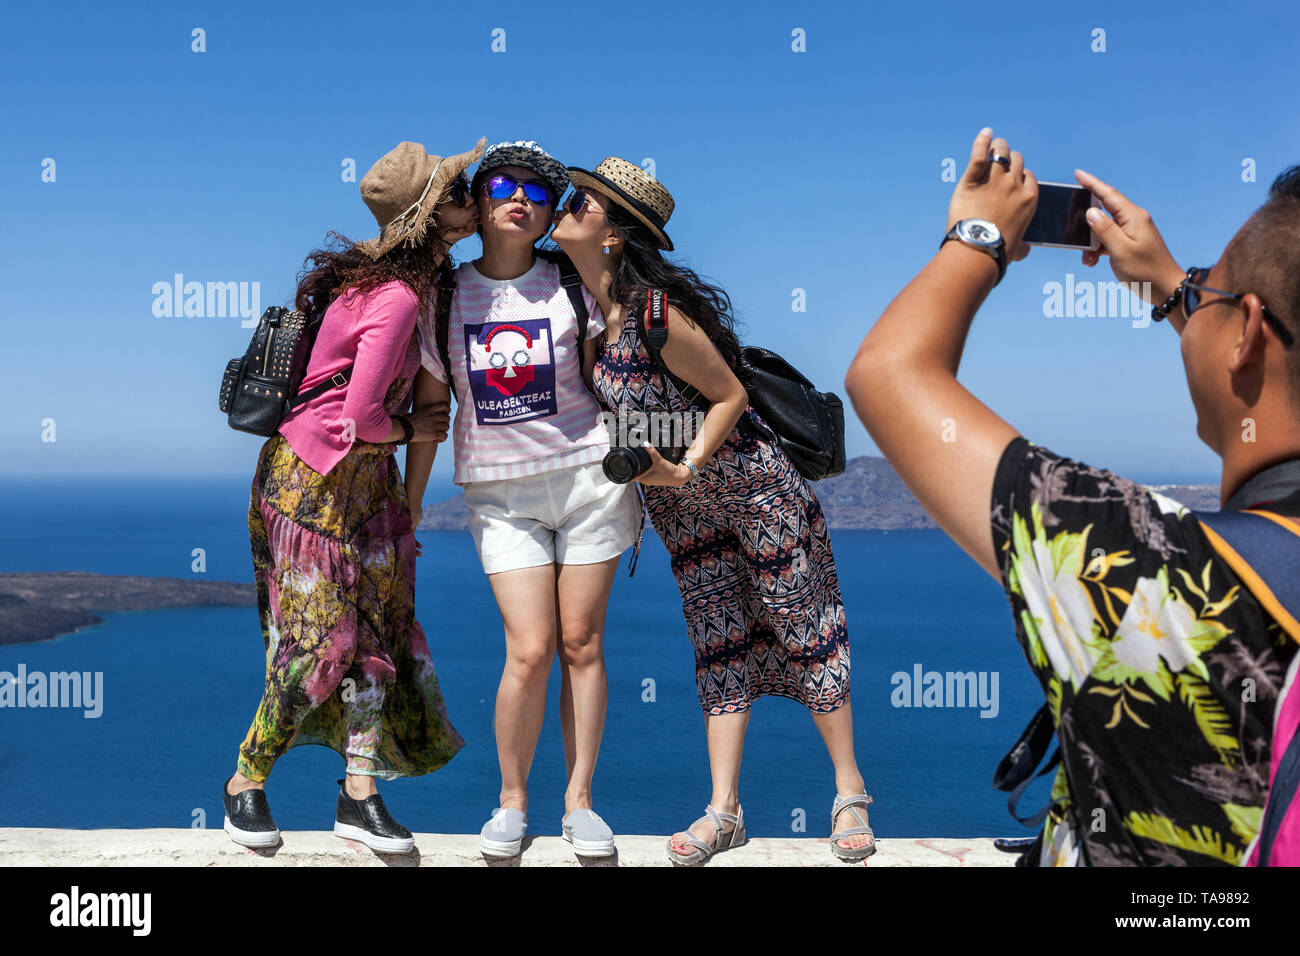 Santorini tourists Three women in a famous place in Greece Tourists taking photo above the sea, Greek islands Europe tourism Stock Photo